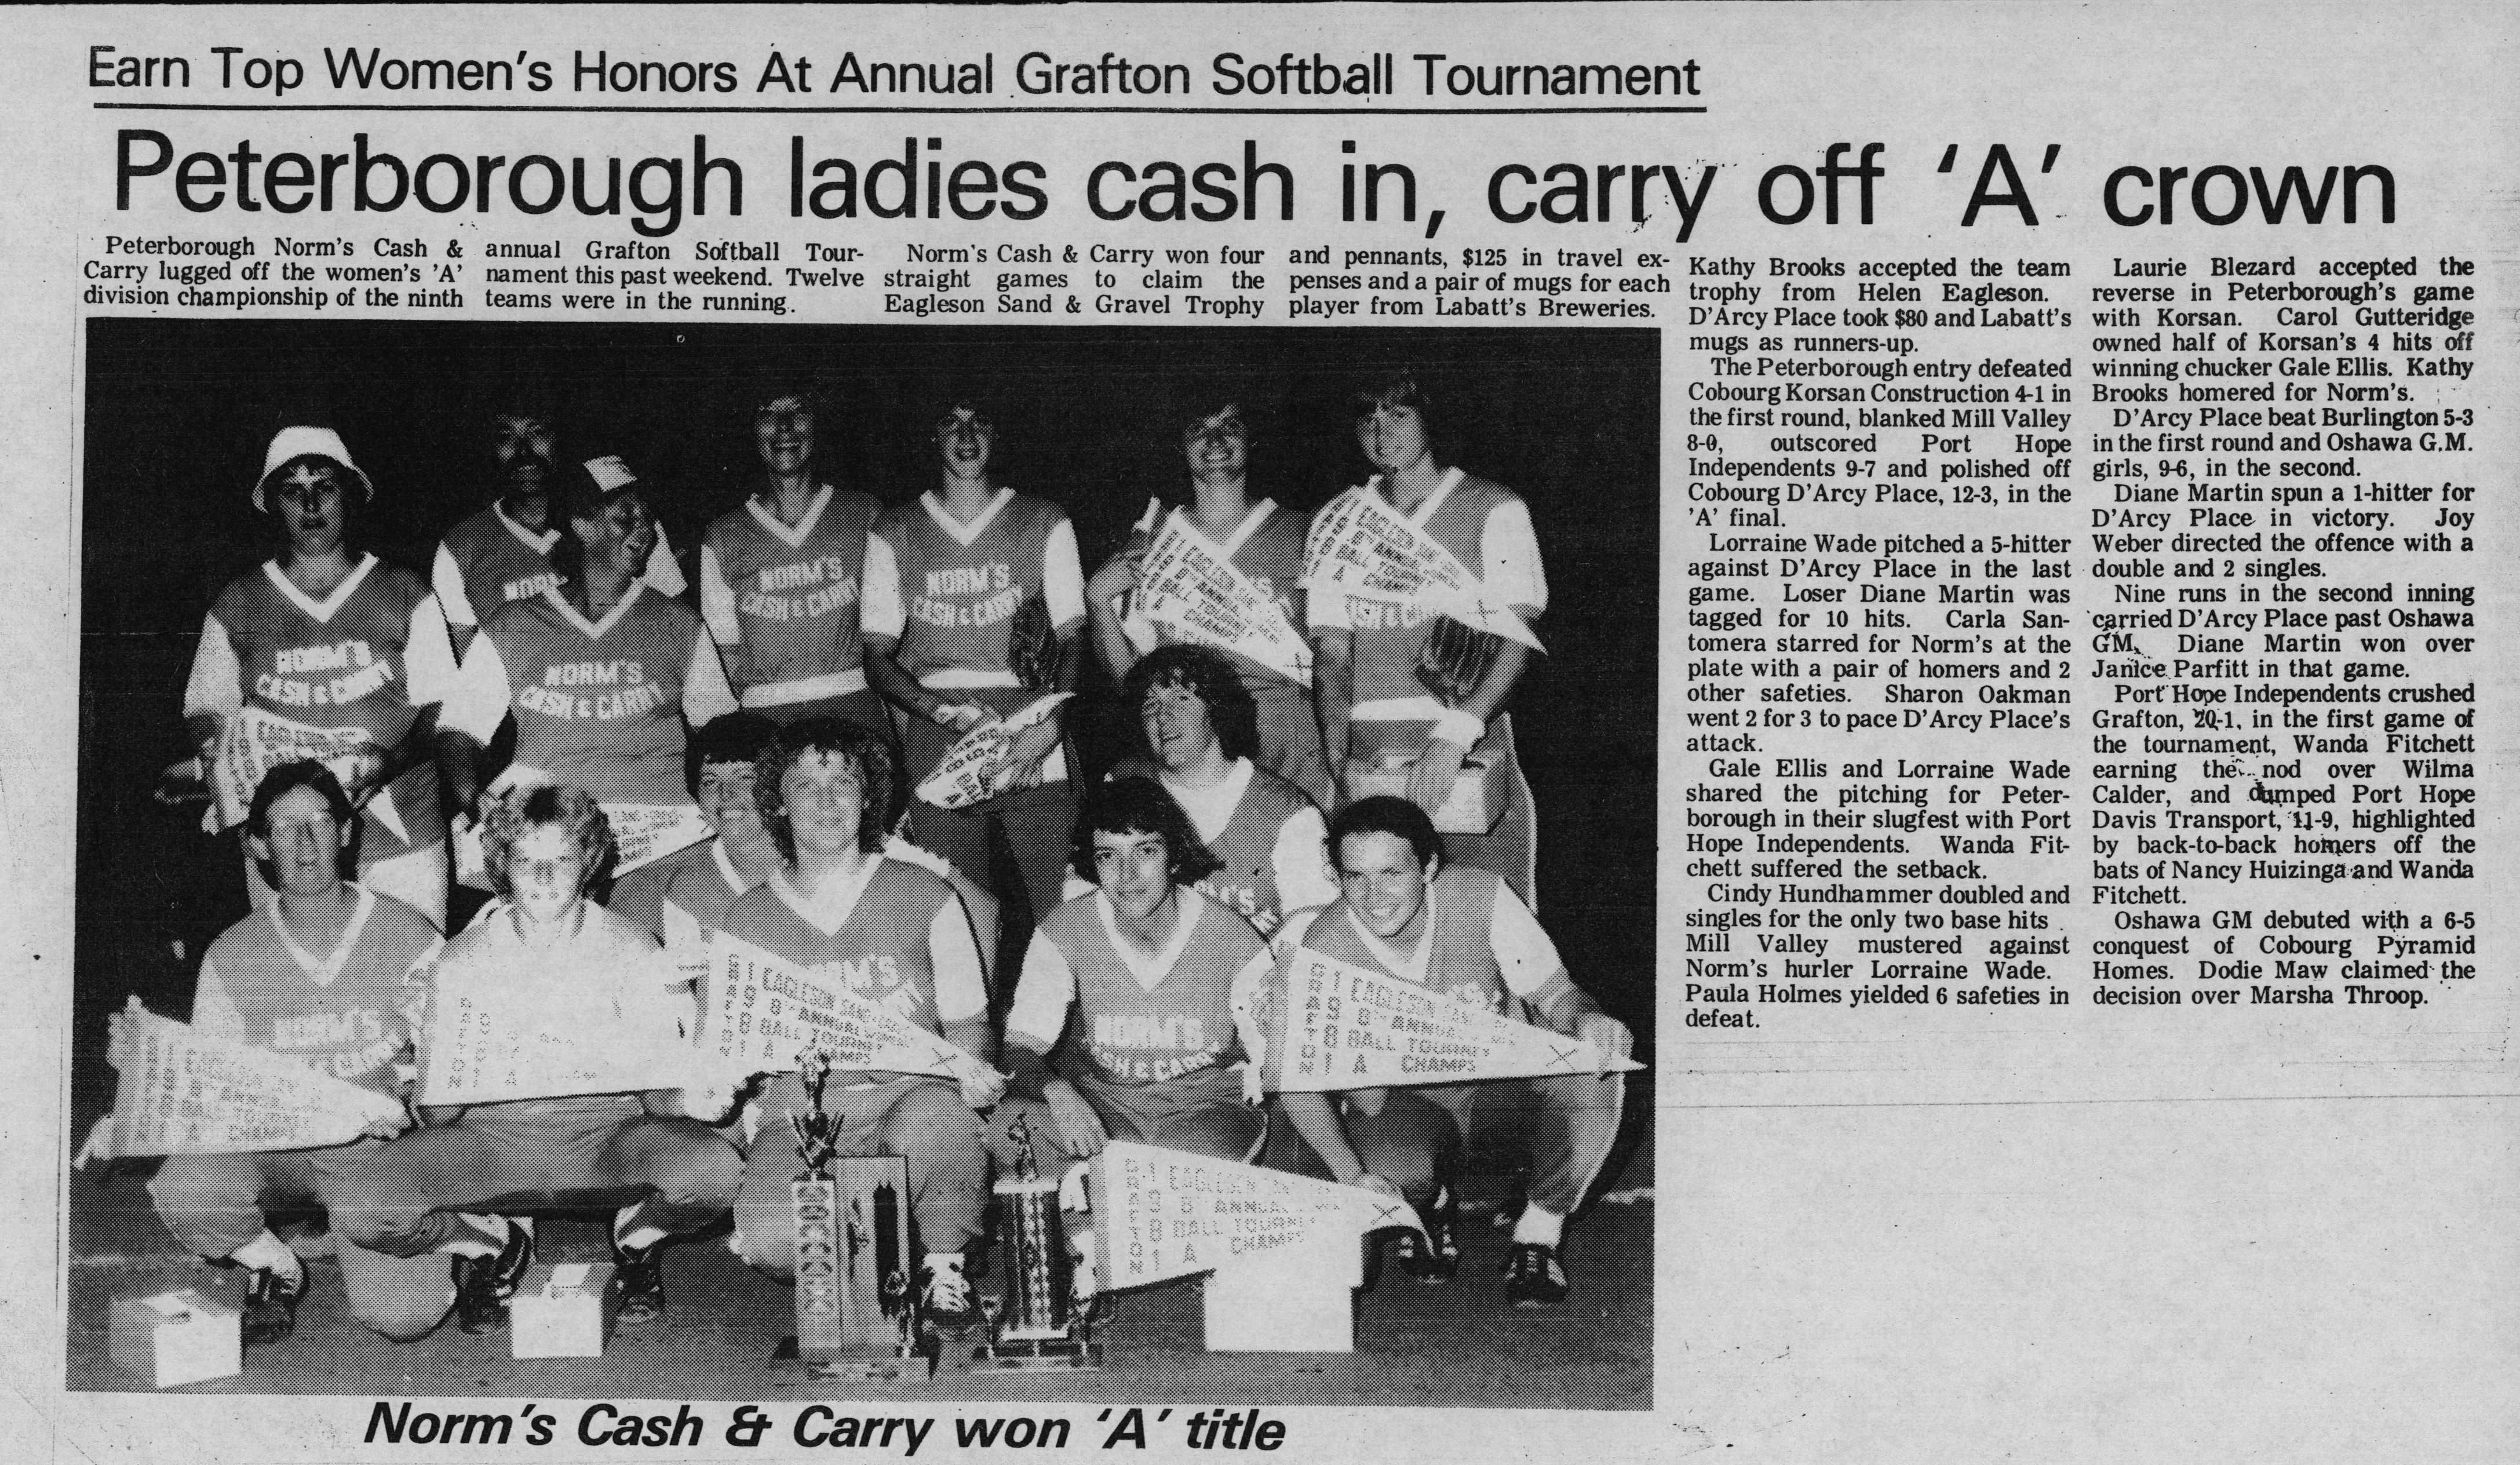 Softball -Grafton Tournament -1981 -Ladies-Summary and Champs-Norms Peterborough